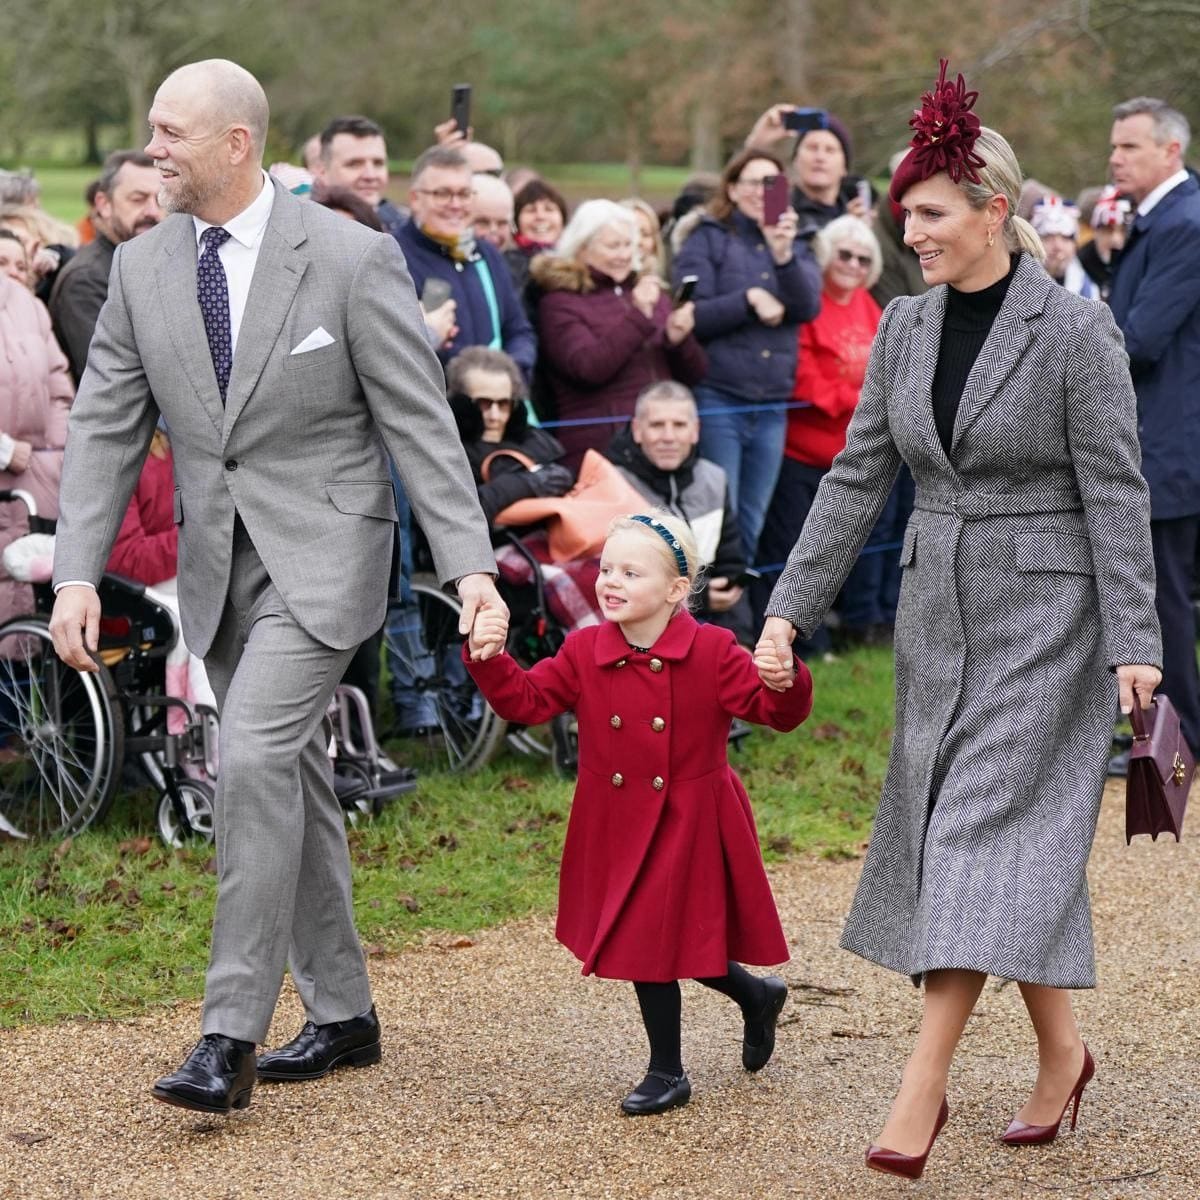 Mike and Zara Tindall with their youngest daughter Lena, who, like Louis, made her royal Christmas walk debut this year